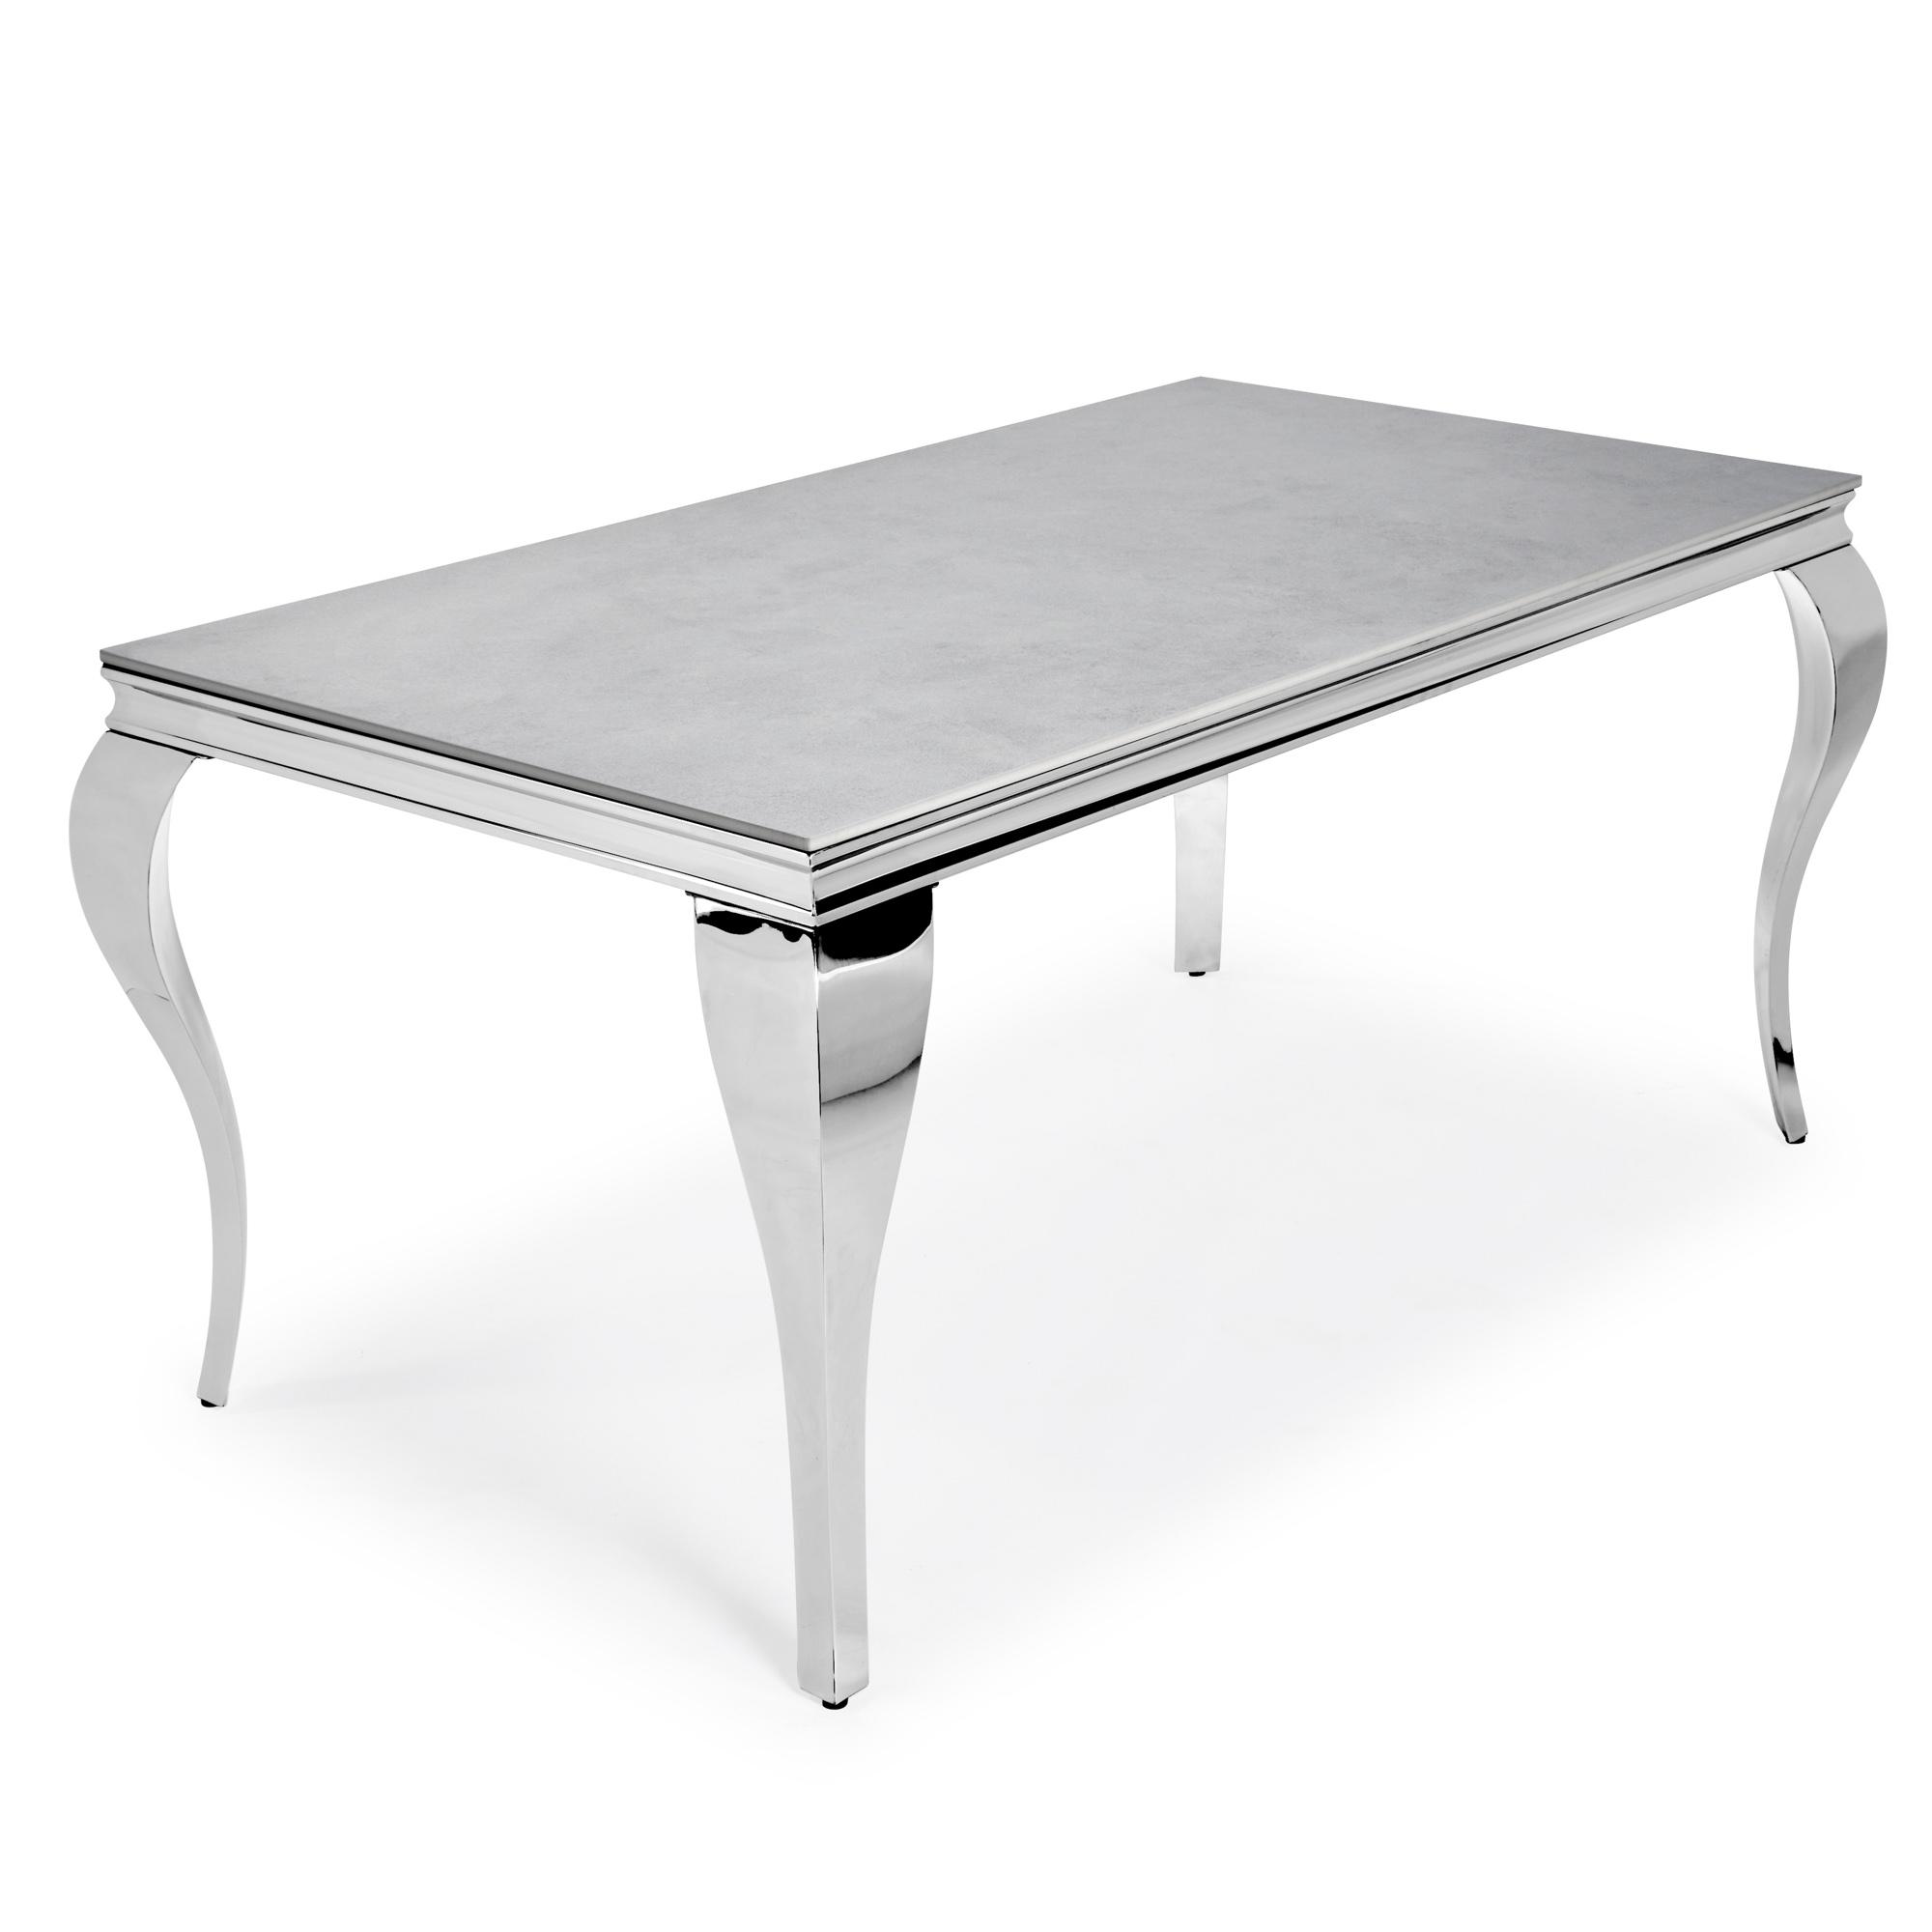 1.6m Louis Polished Stainless Steel Dining Table with Grey Ceramic Top